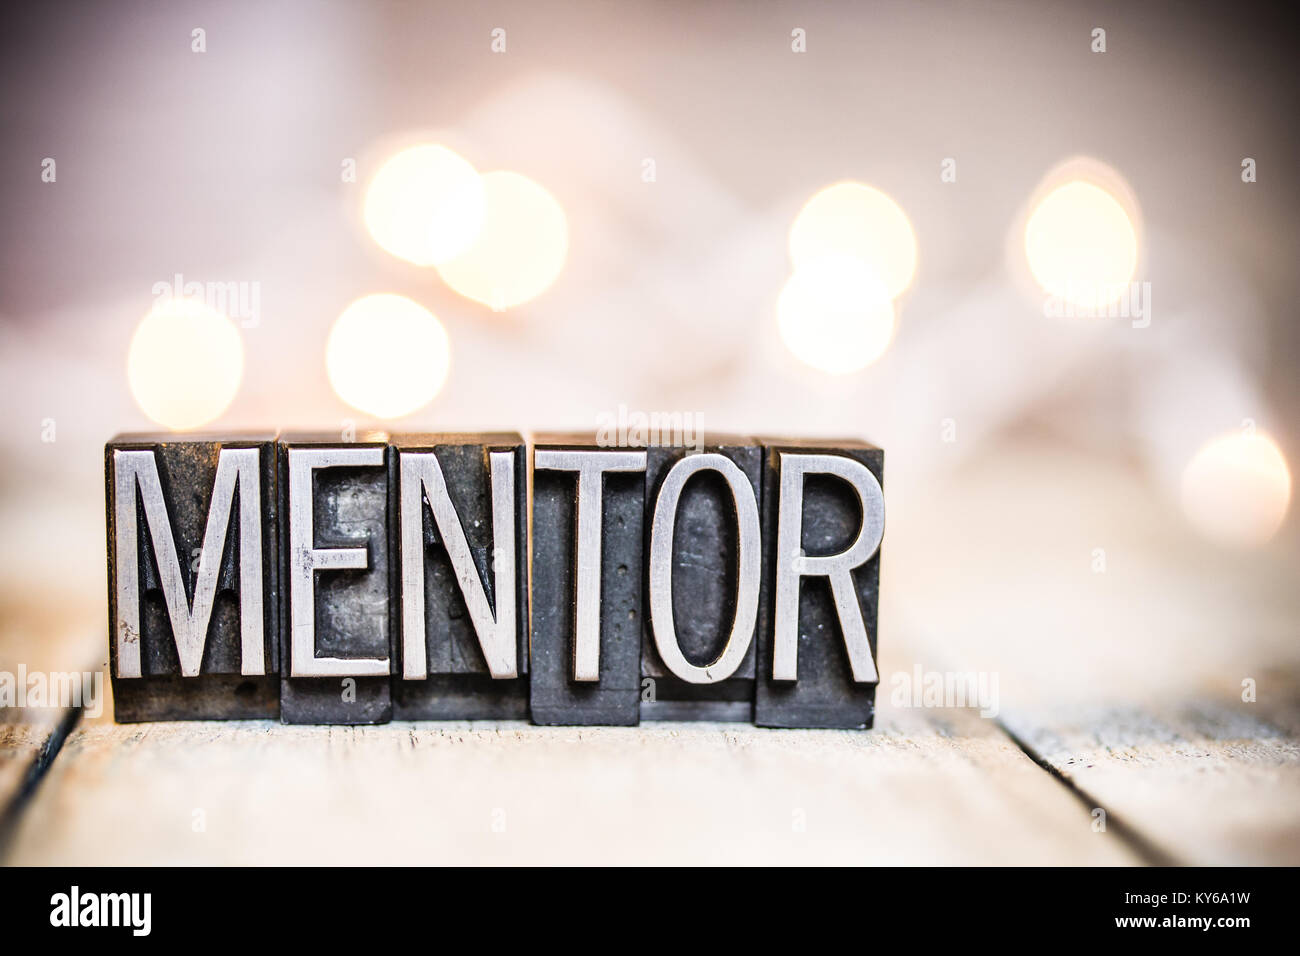 The word MENTOR written in vintage metal letterpress type on a bokeh light and wooden background Photo - Alamy